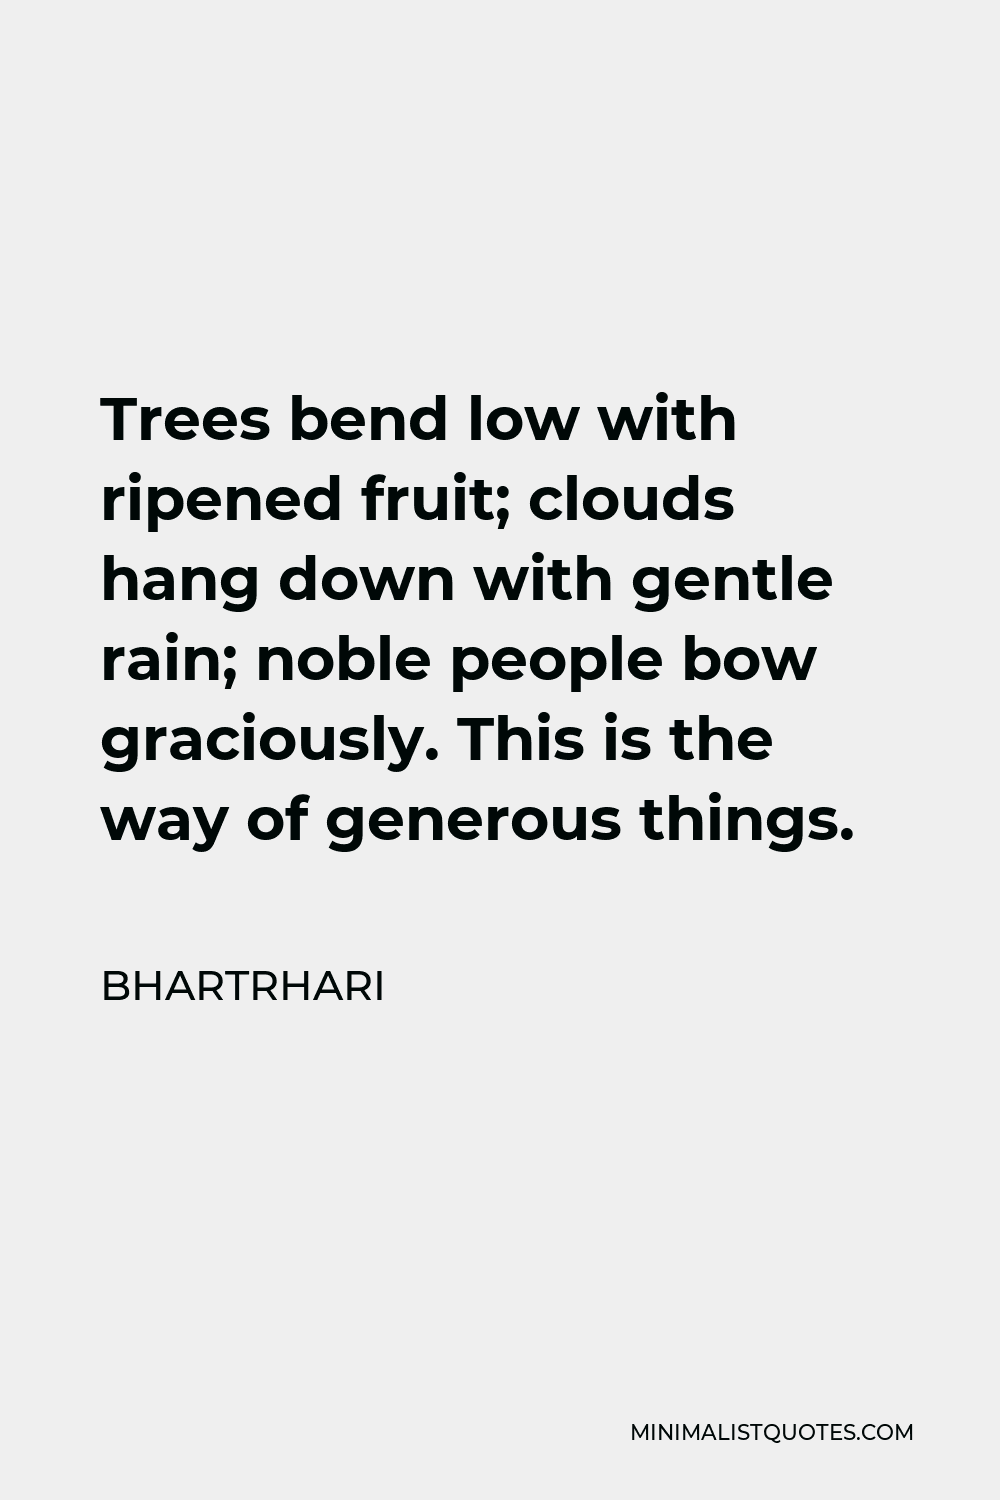 Bhartrhari Quote - Trees bend low with ripened fruit; clouds hang down with gentle rain; noble people bow graciously. This is the way of generous things.